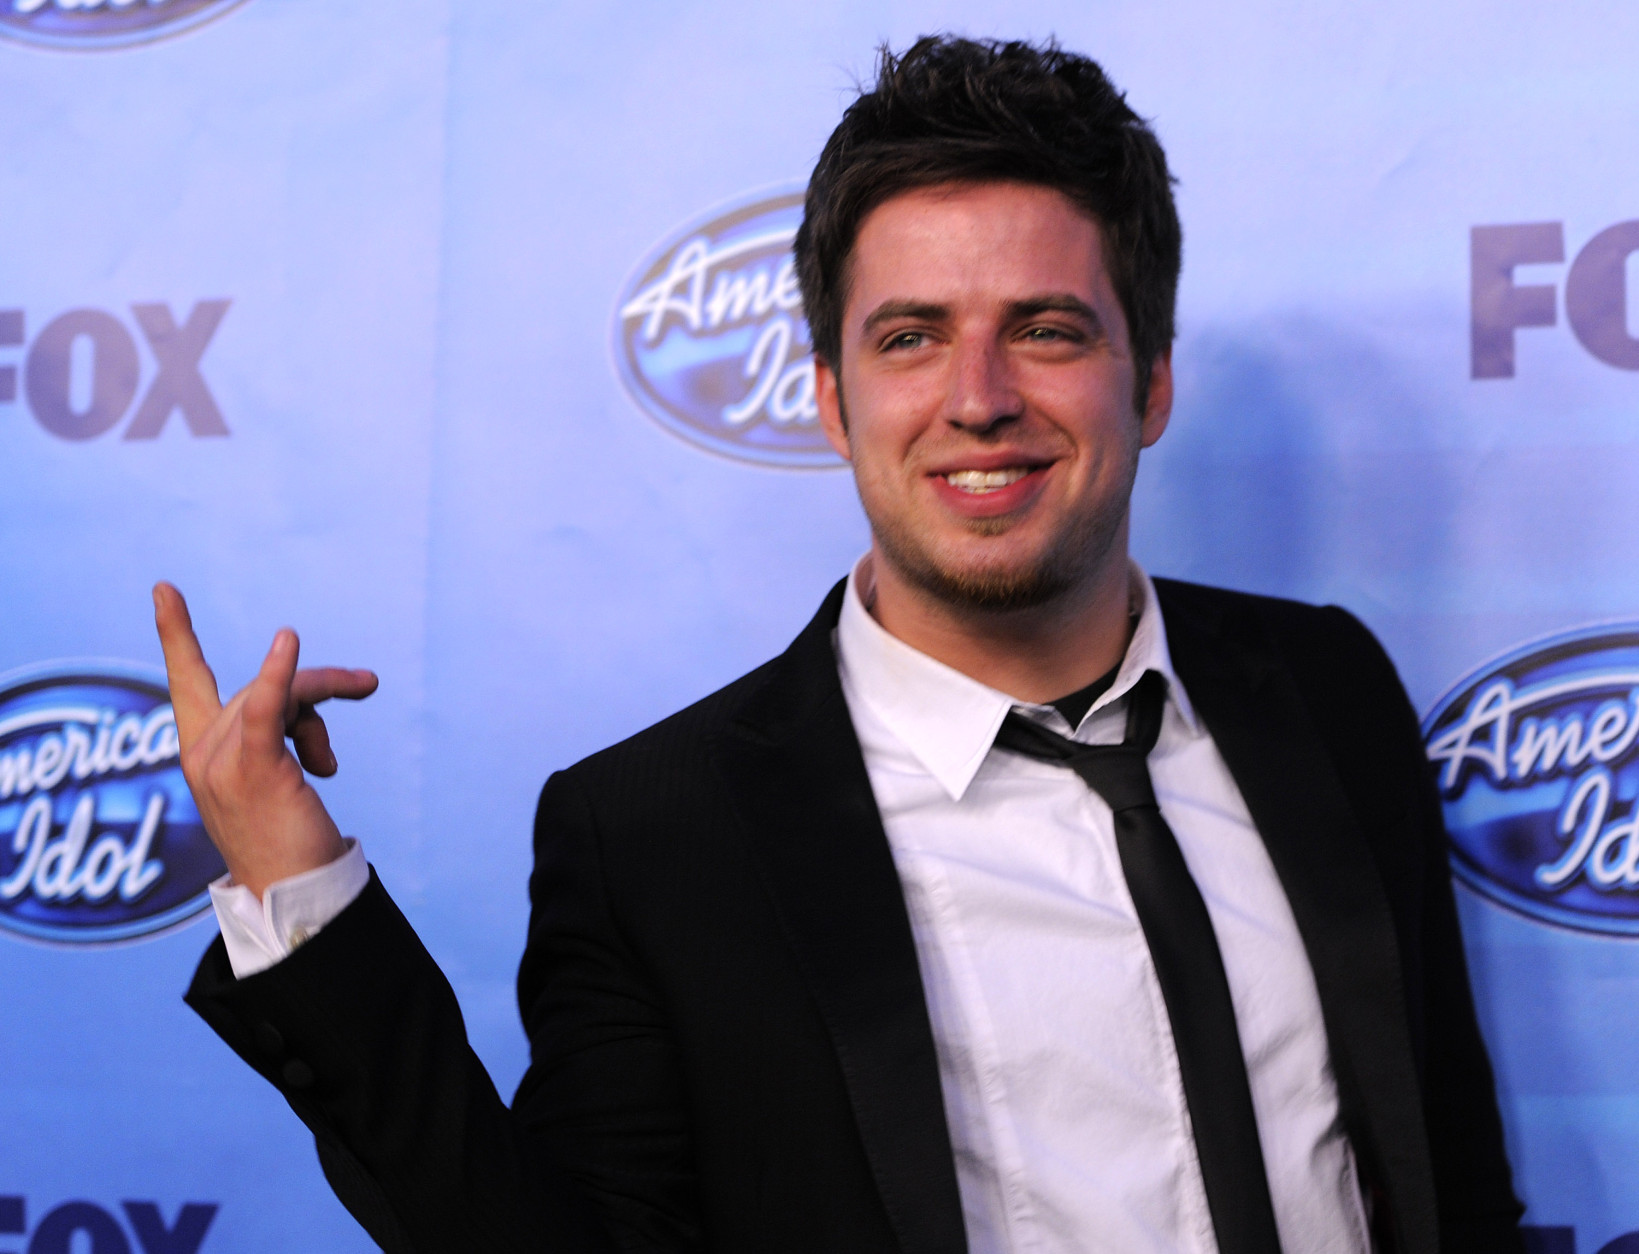 Lee DeWyze, winner of Season 9 of American Idol, poses backstage after the finale on Wednesday, May 26, 2010, in Los Angeles. (AP Photo/Chris Pizzello)